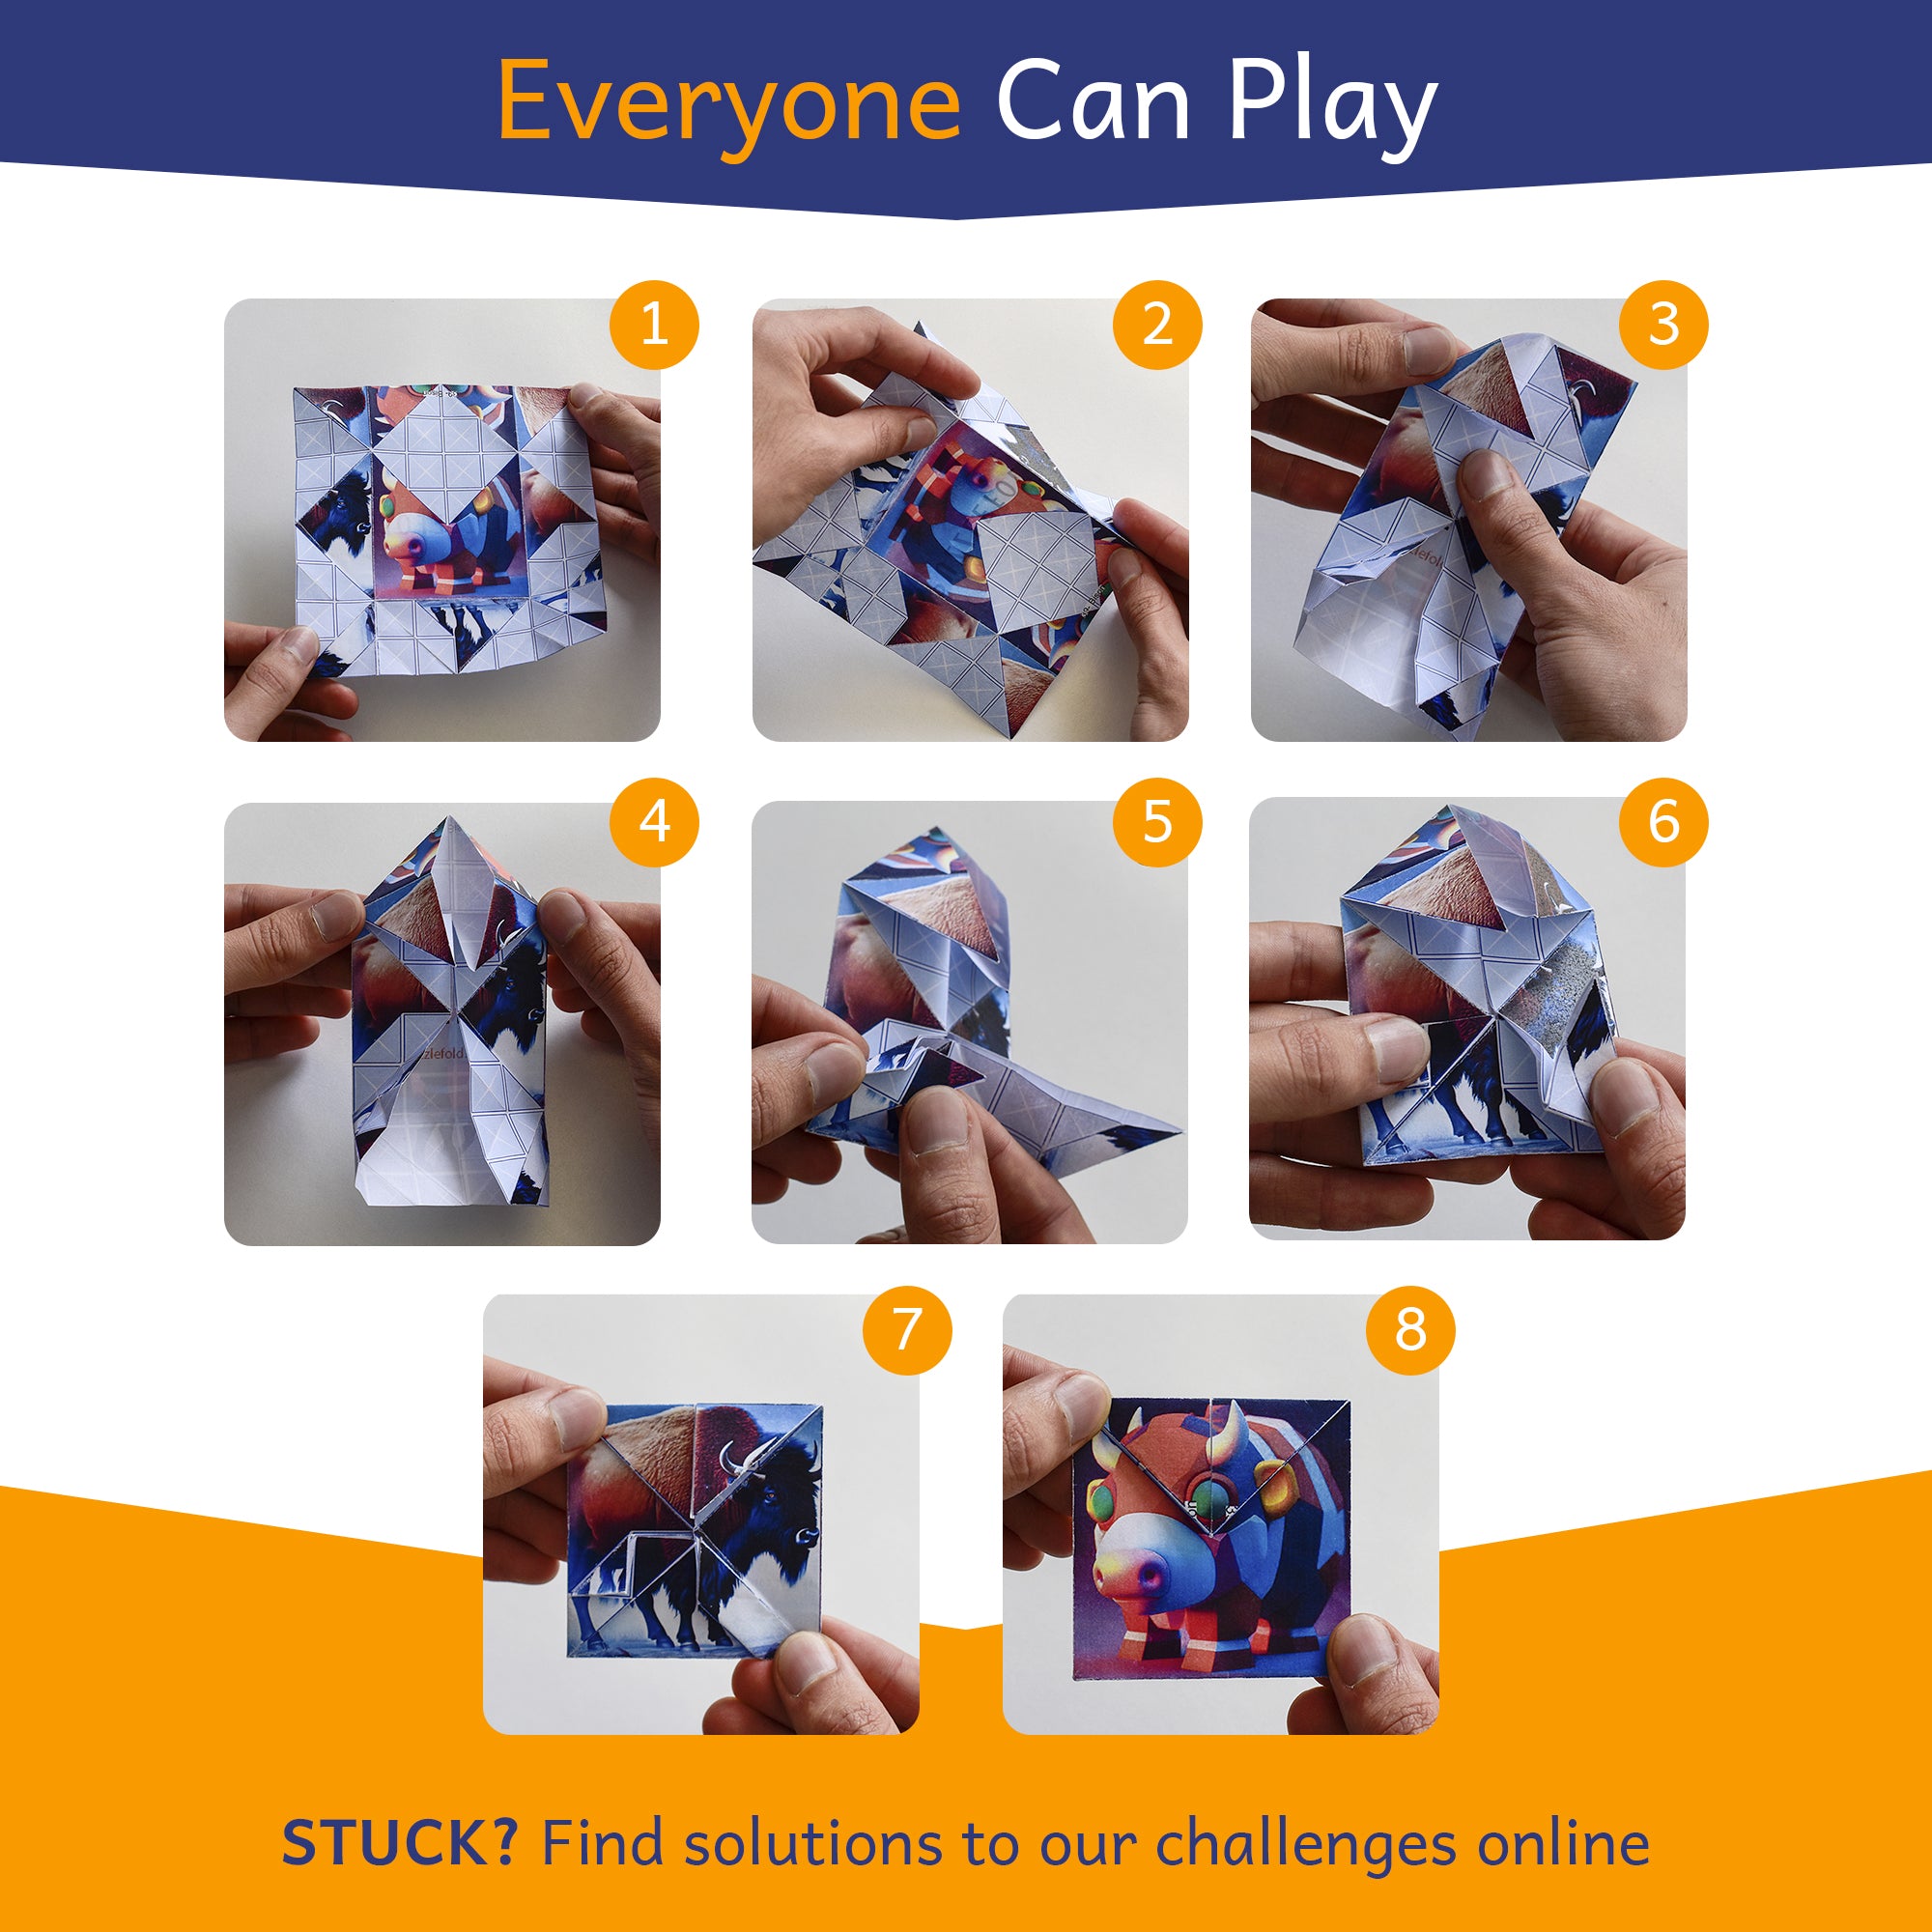 Complete Origami Kit – The Puzzle Nerds